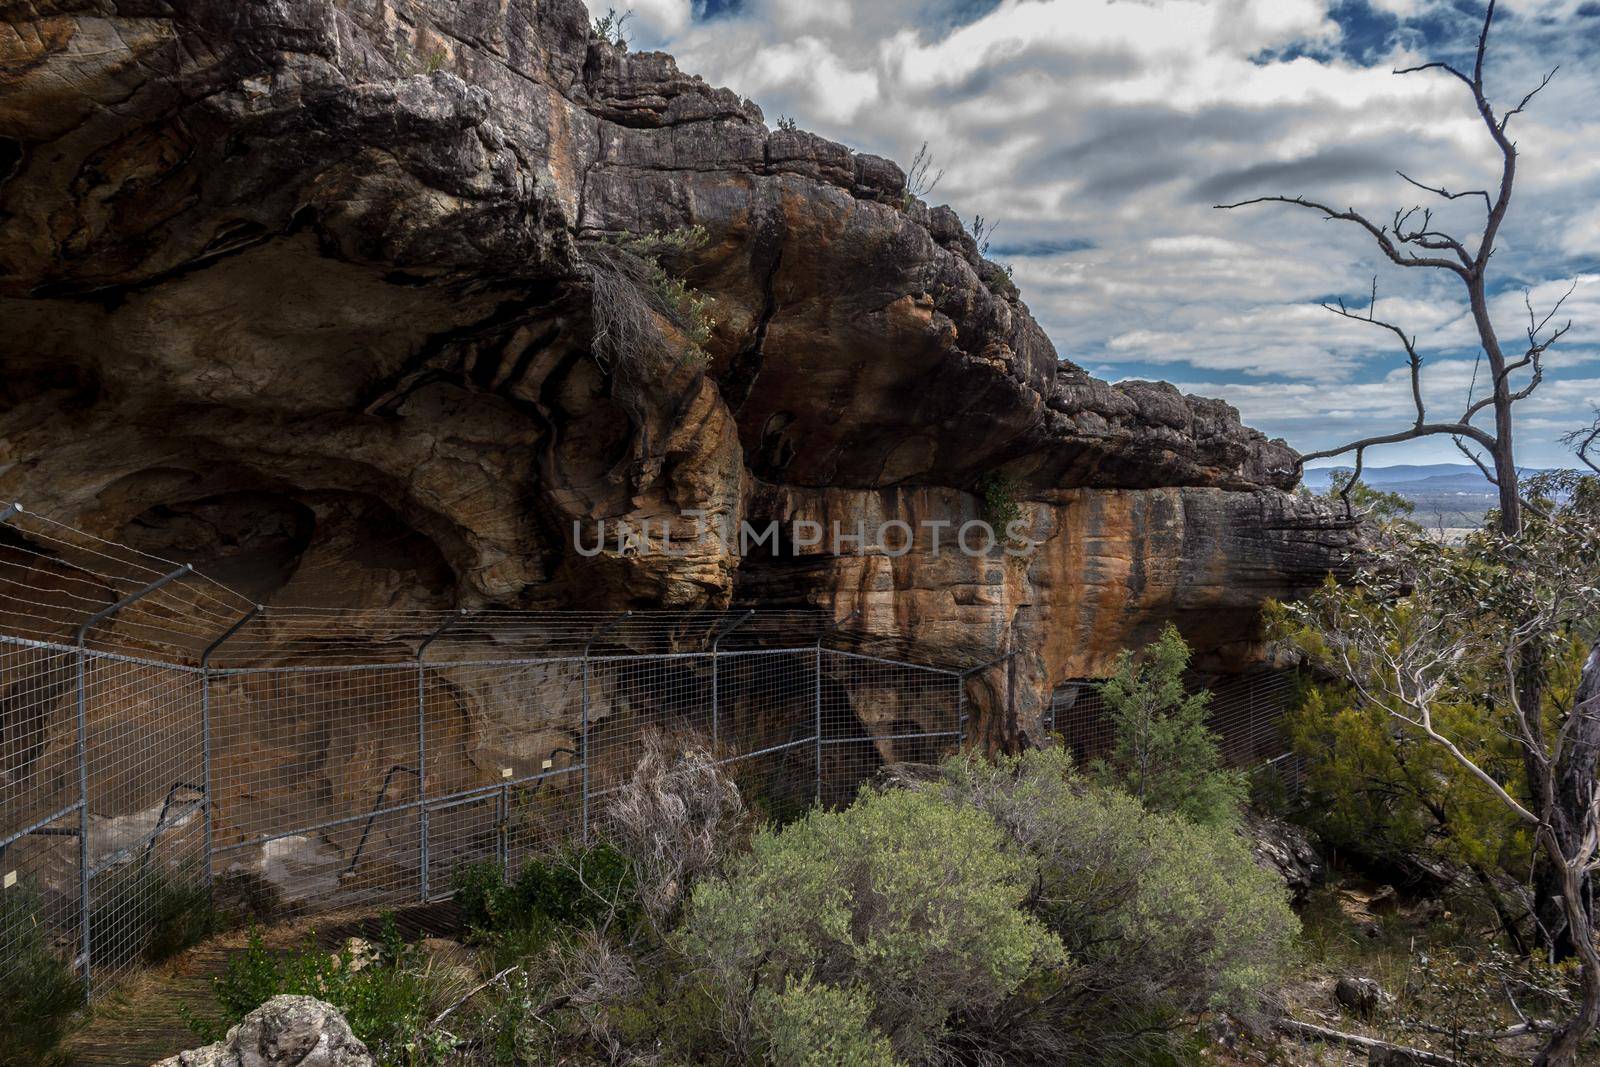 view over a Aboriginal cave, behind a fence, in australia by bettercallcurry